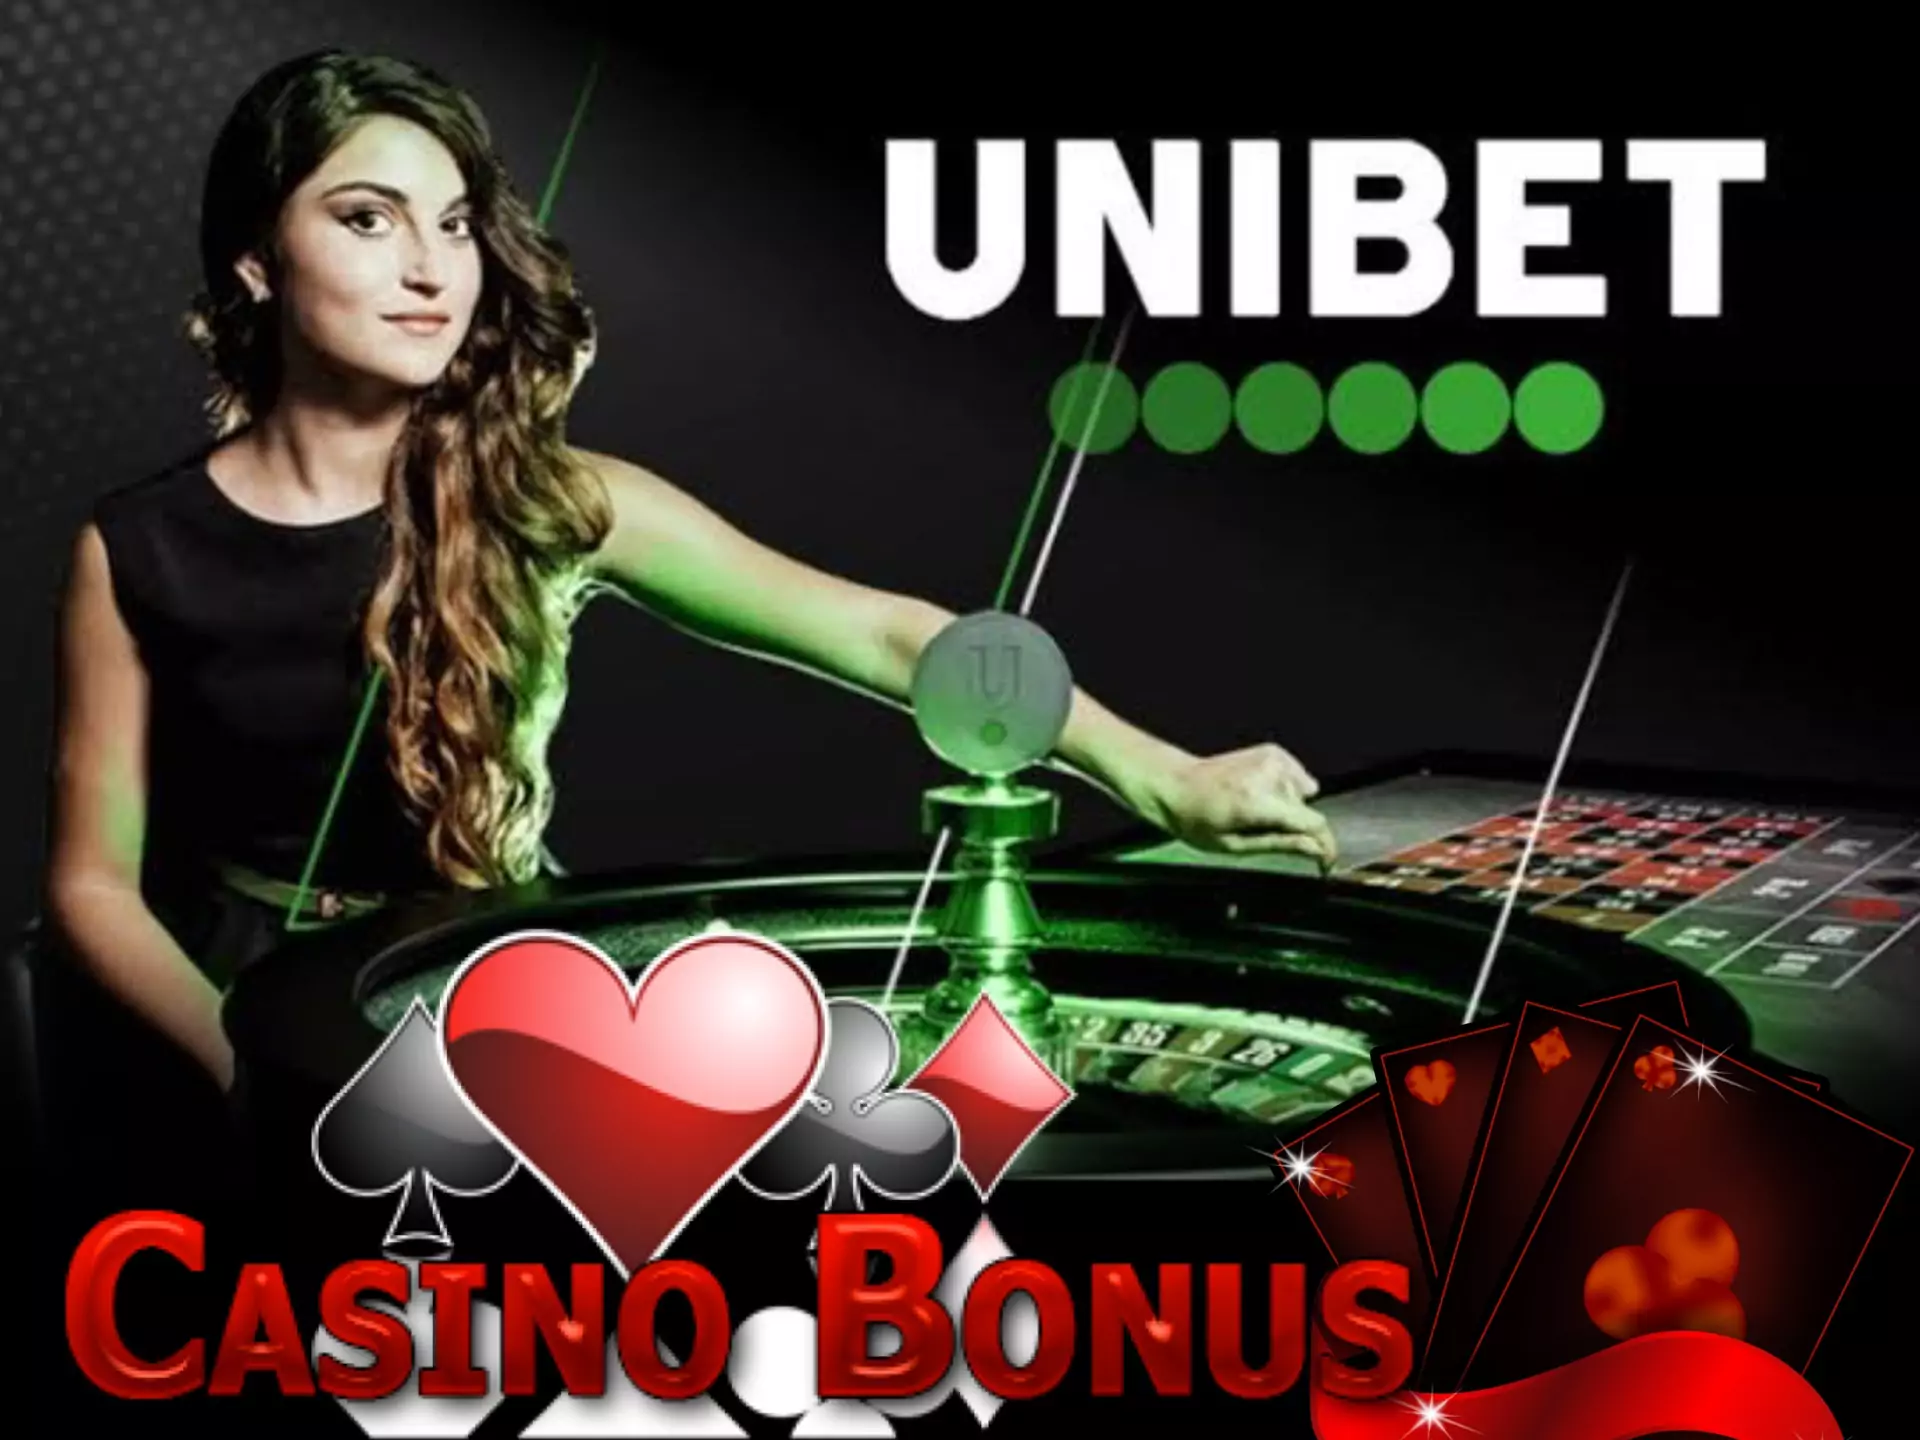 You can spend your Unibet welcome bonus on casino games.